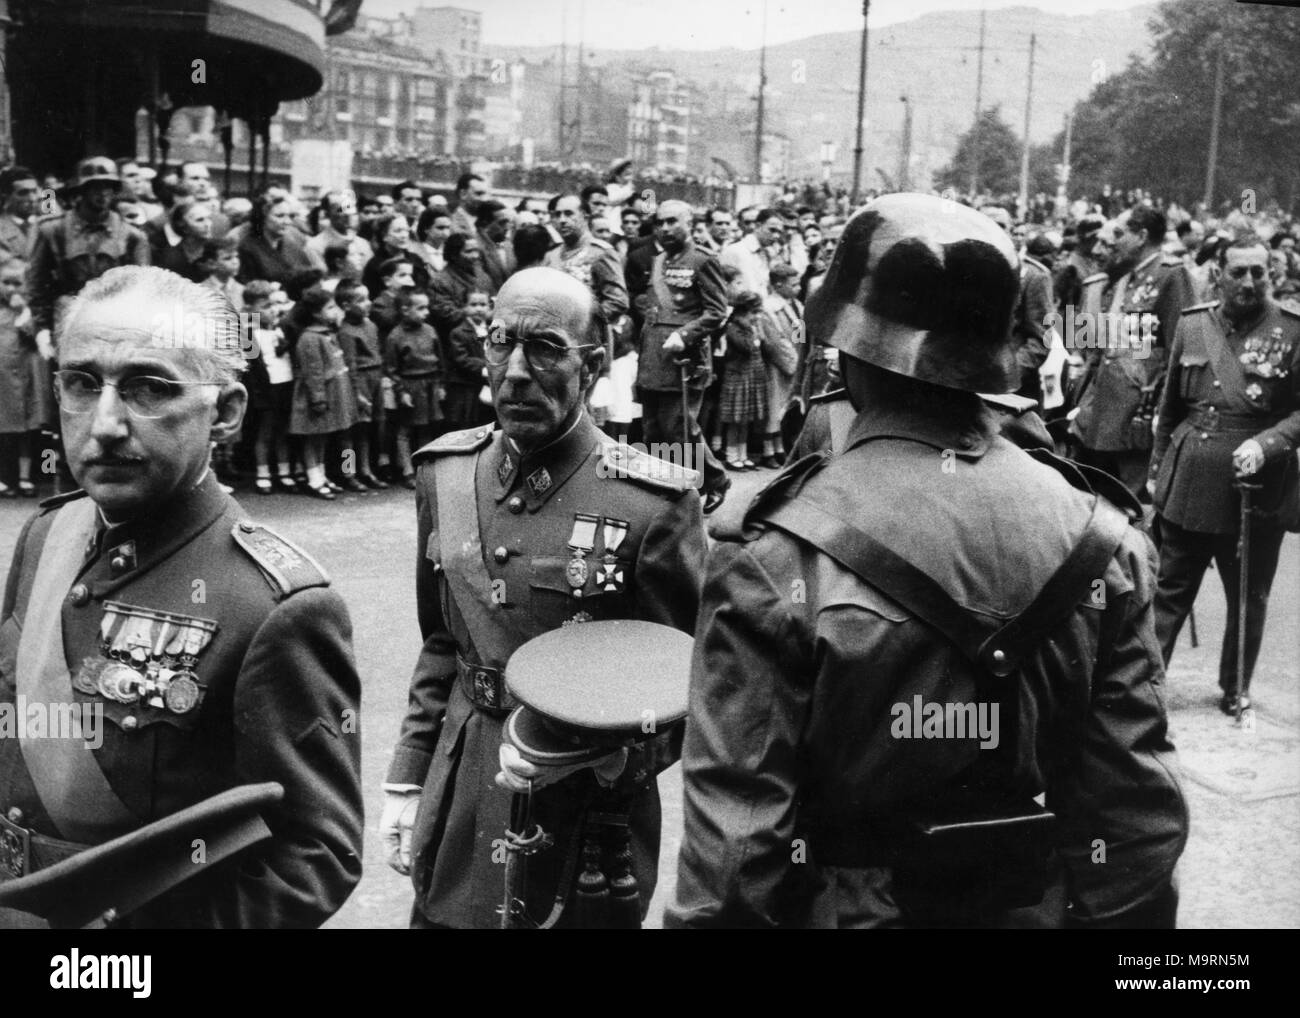 military parade, generals of the military junta of pinochet, chile, 70s Stock Photo